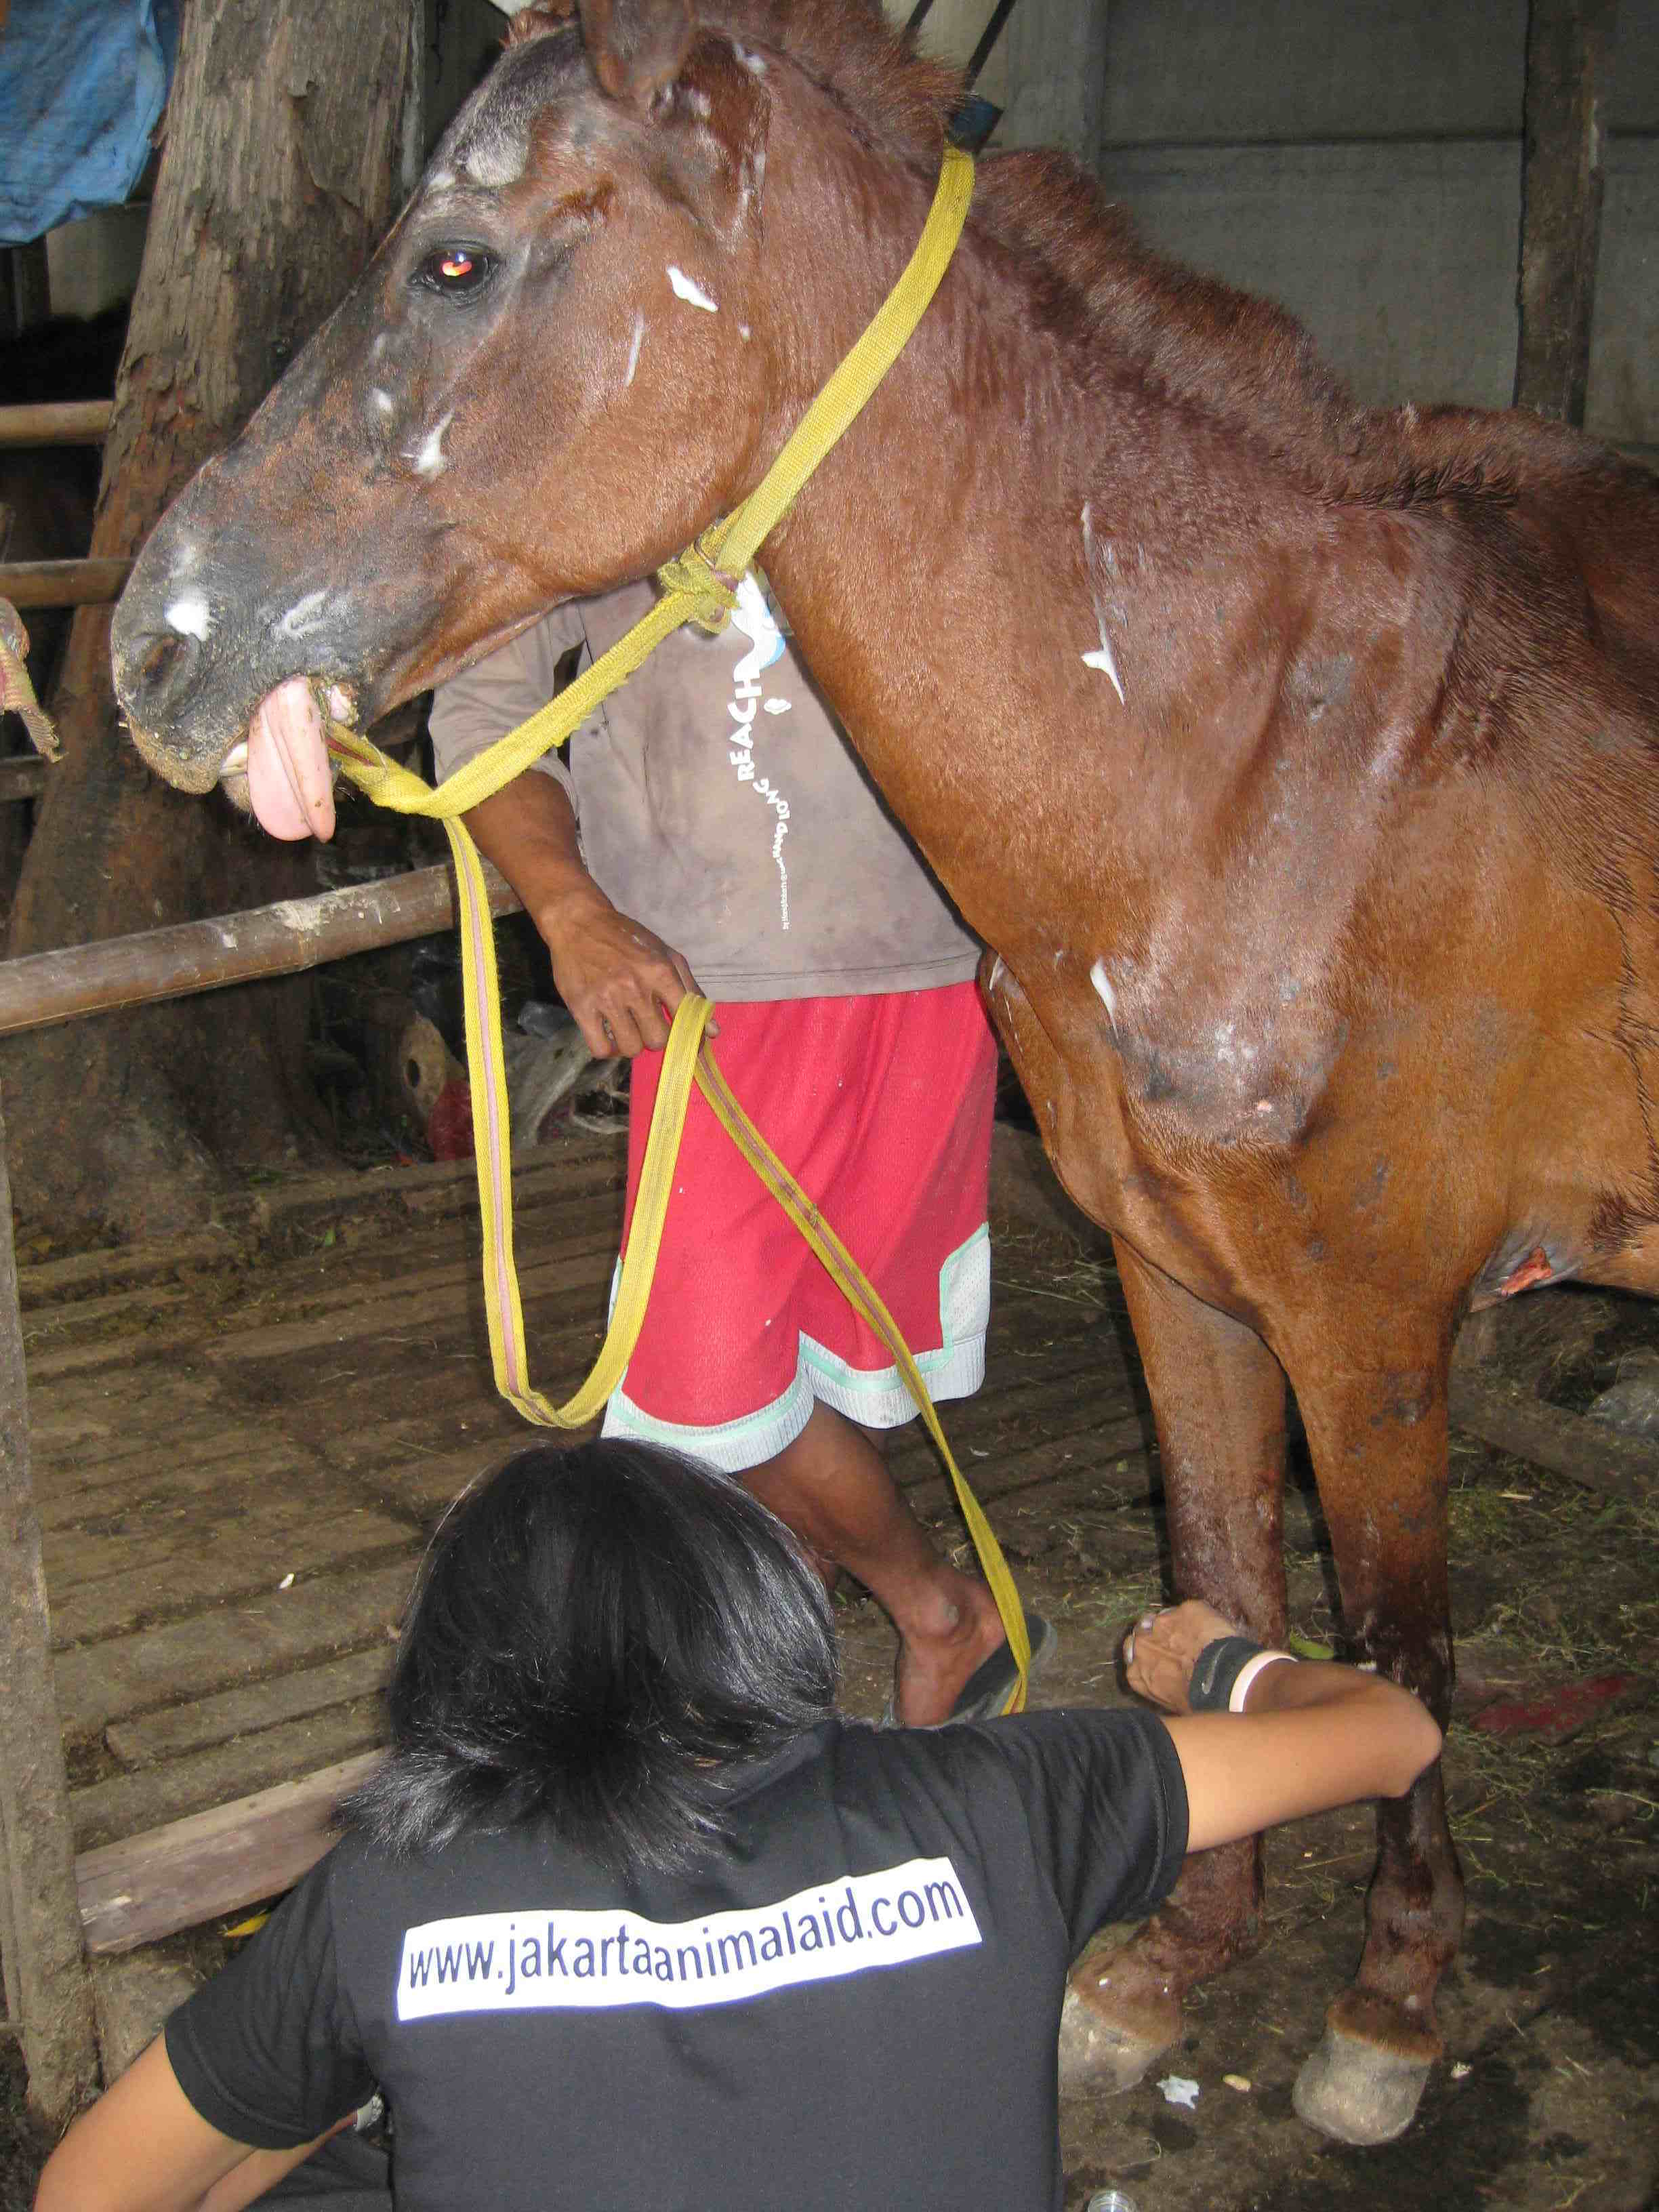 Sharing knowledge on basic horse care to the handlers.